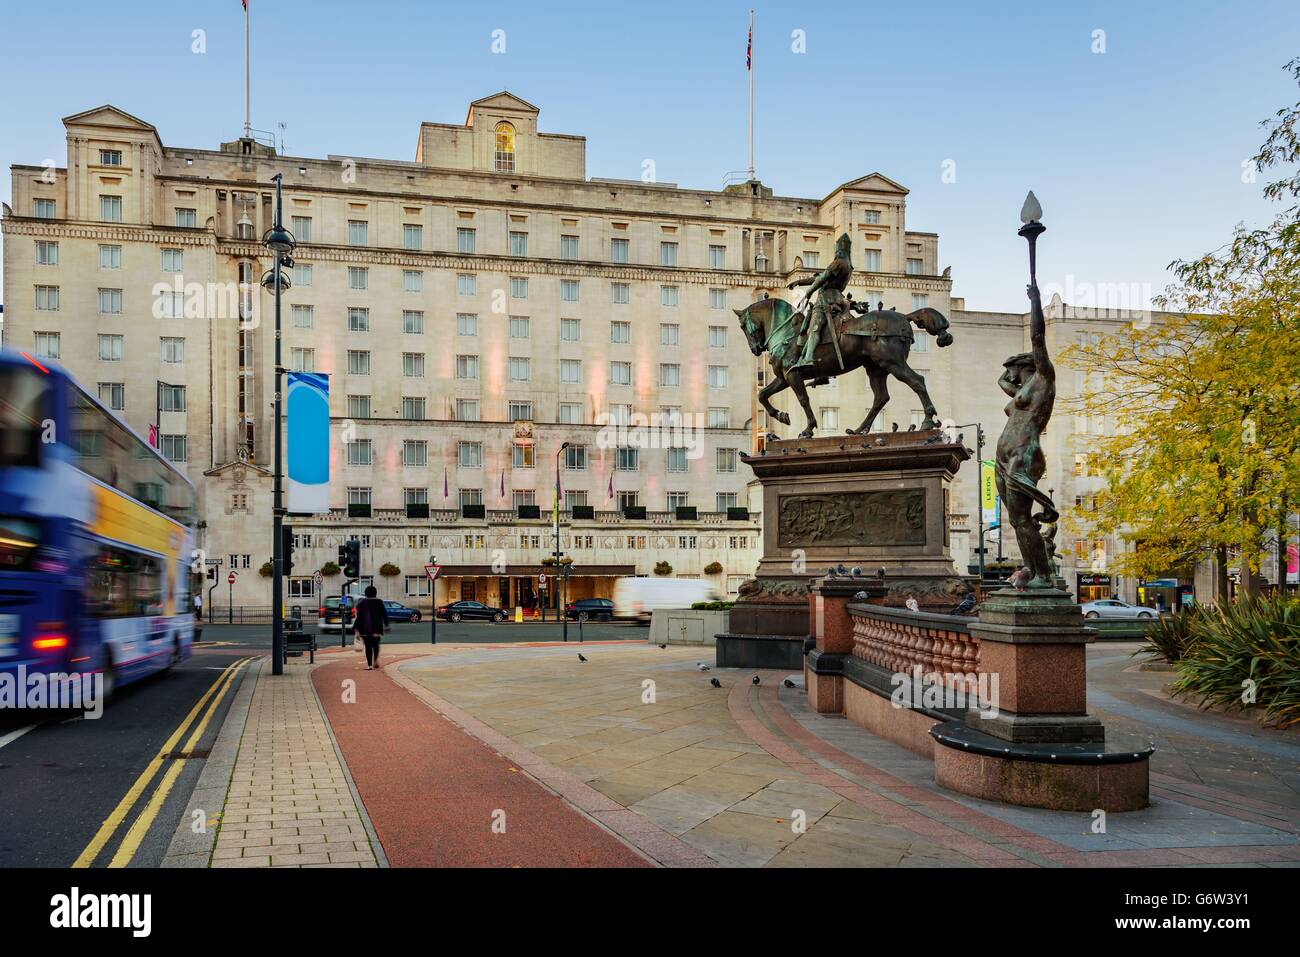 City Square is a paved open area in Leeds city center in West Yorkshire, England. Stock Photo